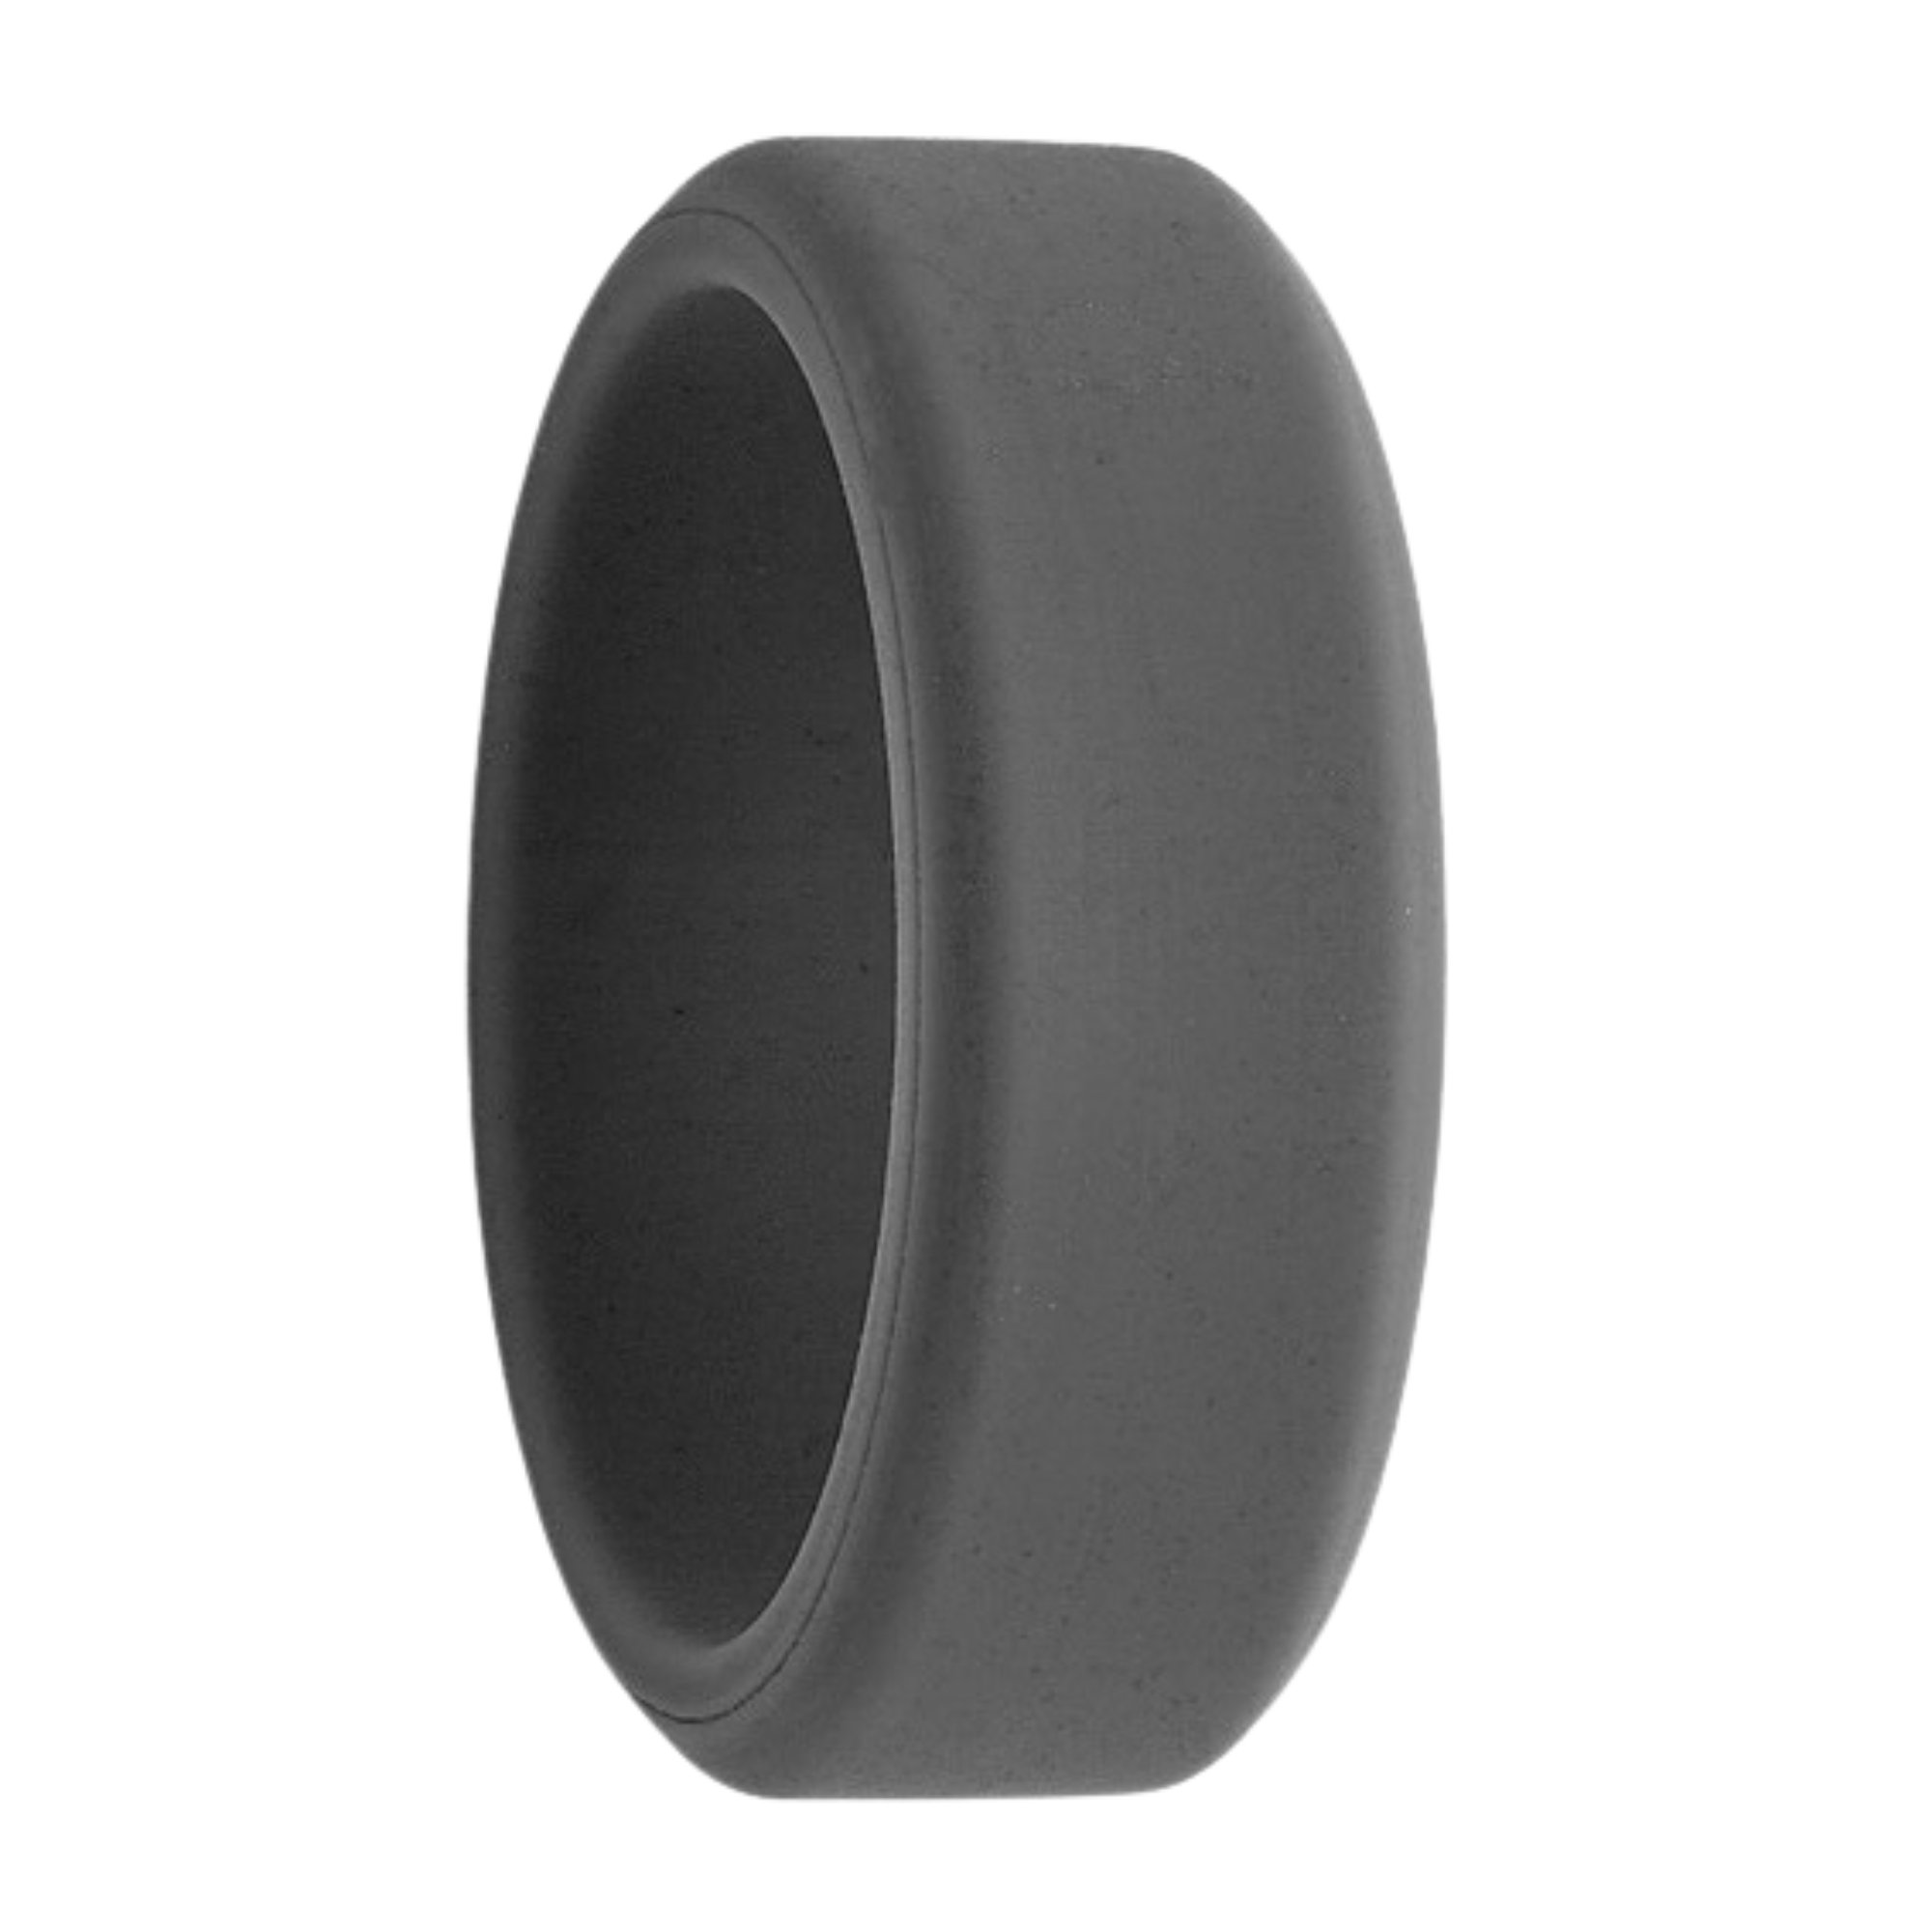 8mm Flat Grey Men's Silicone Ring for men